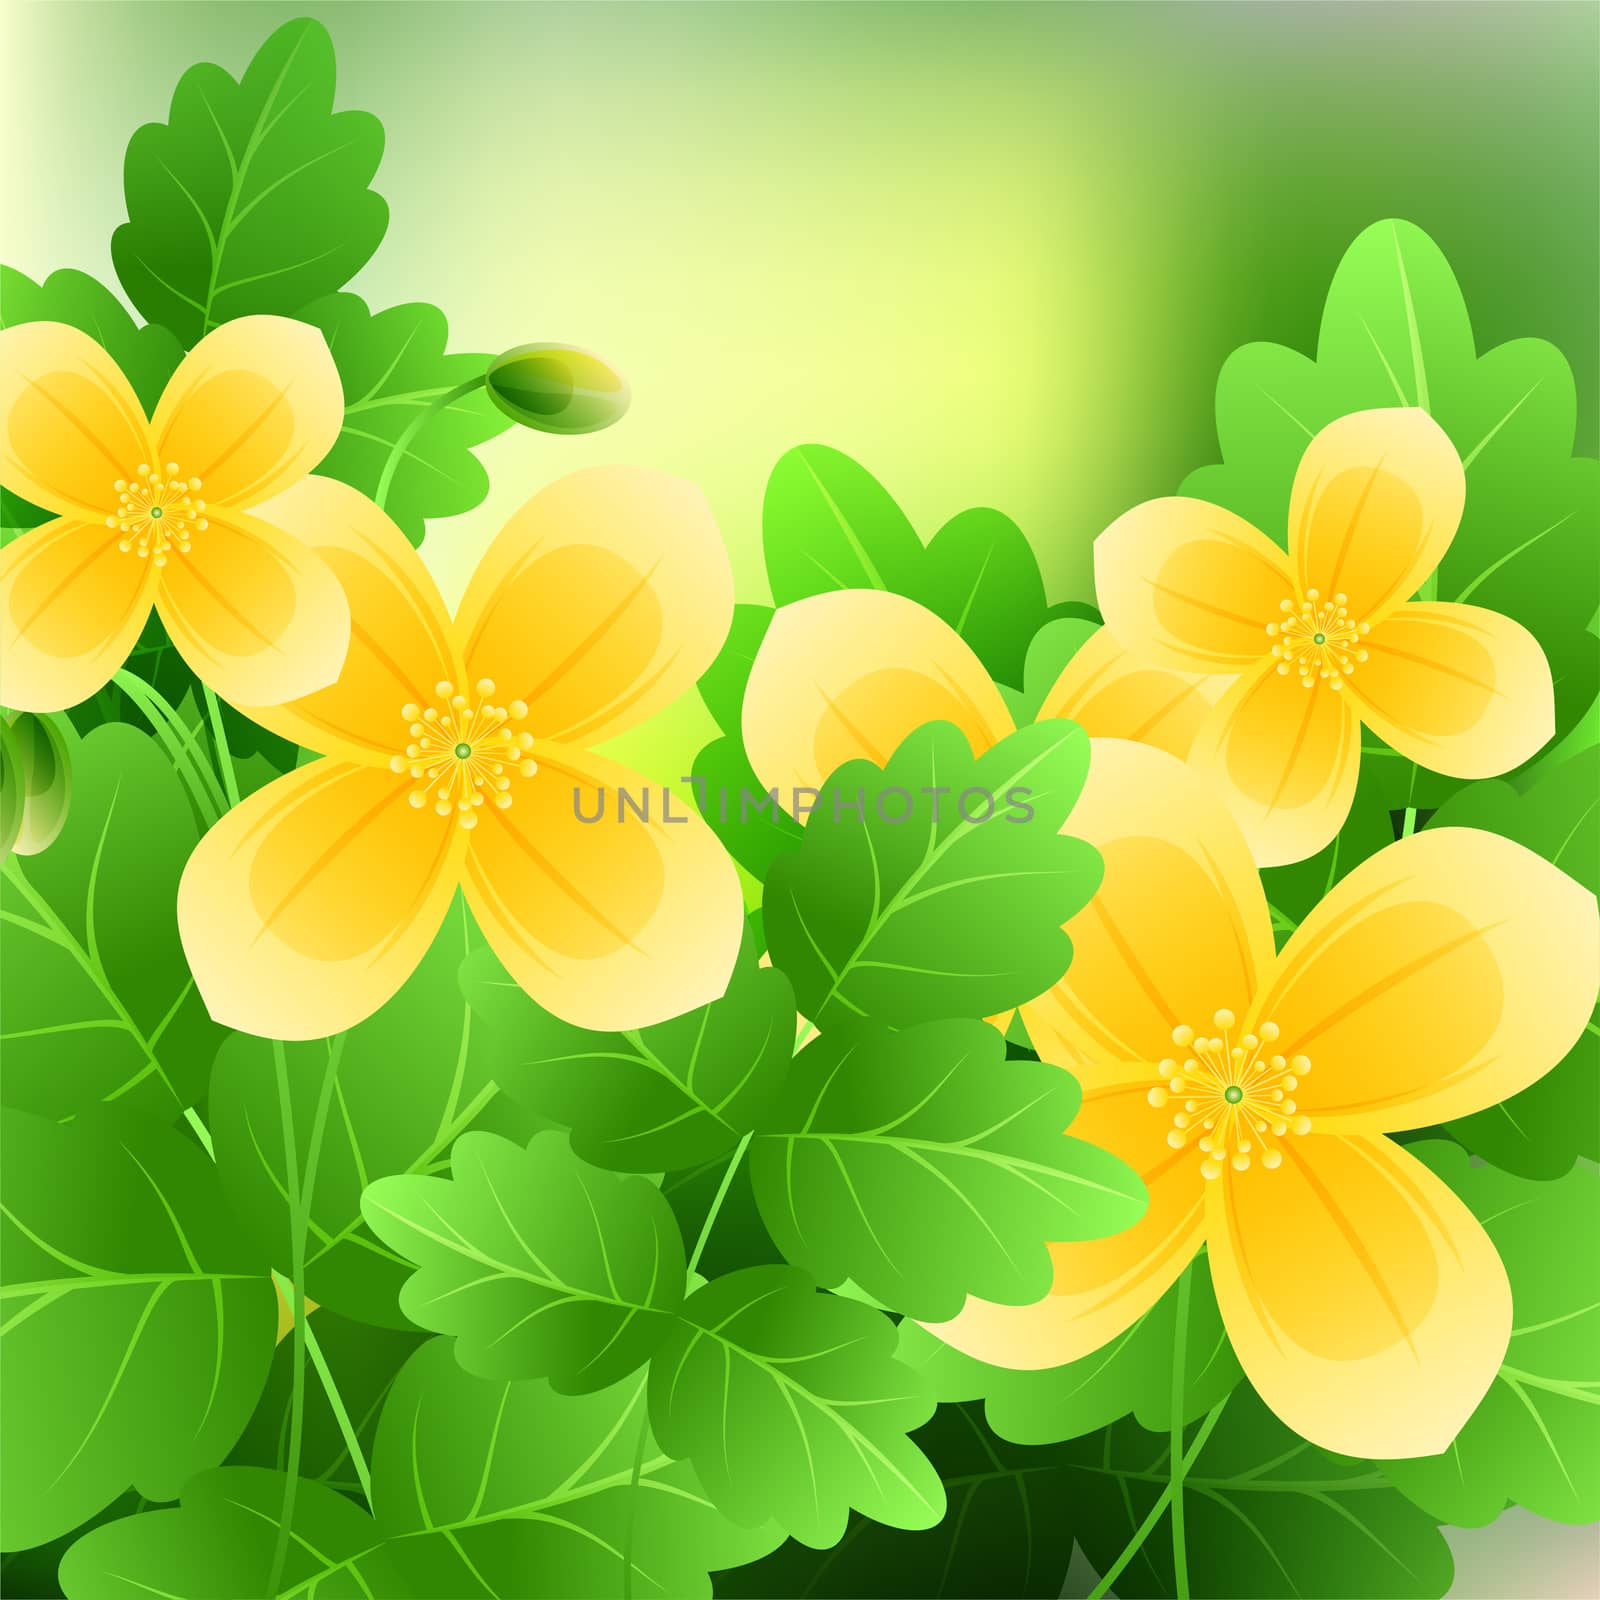 Beautiful spring flowers Celandine. Cards or your design with space for text. by Adamchuk